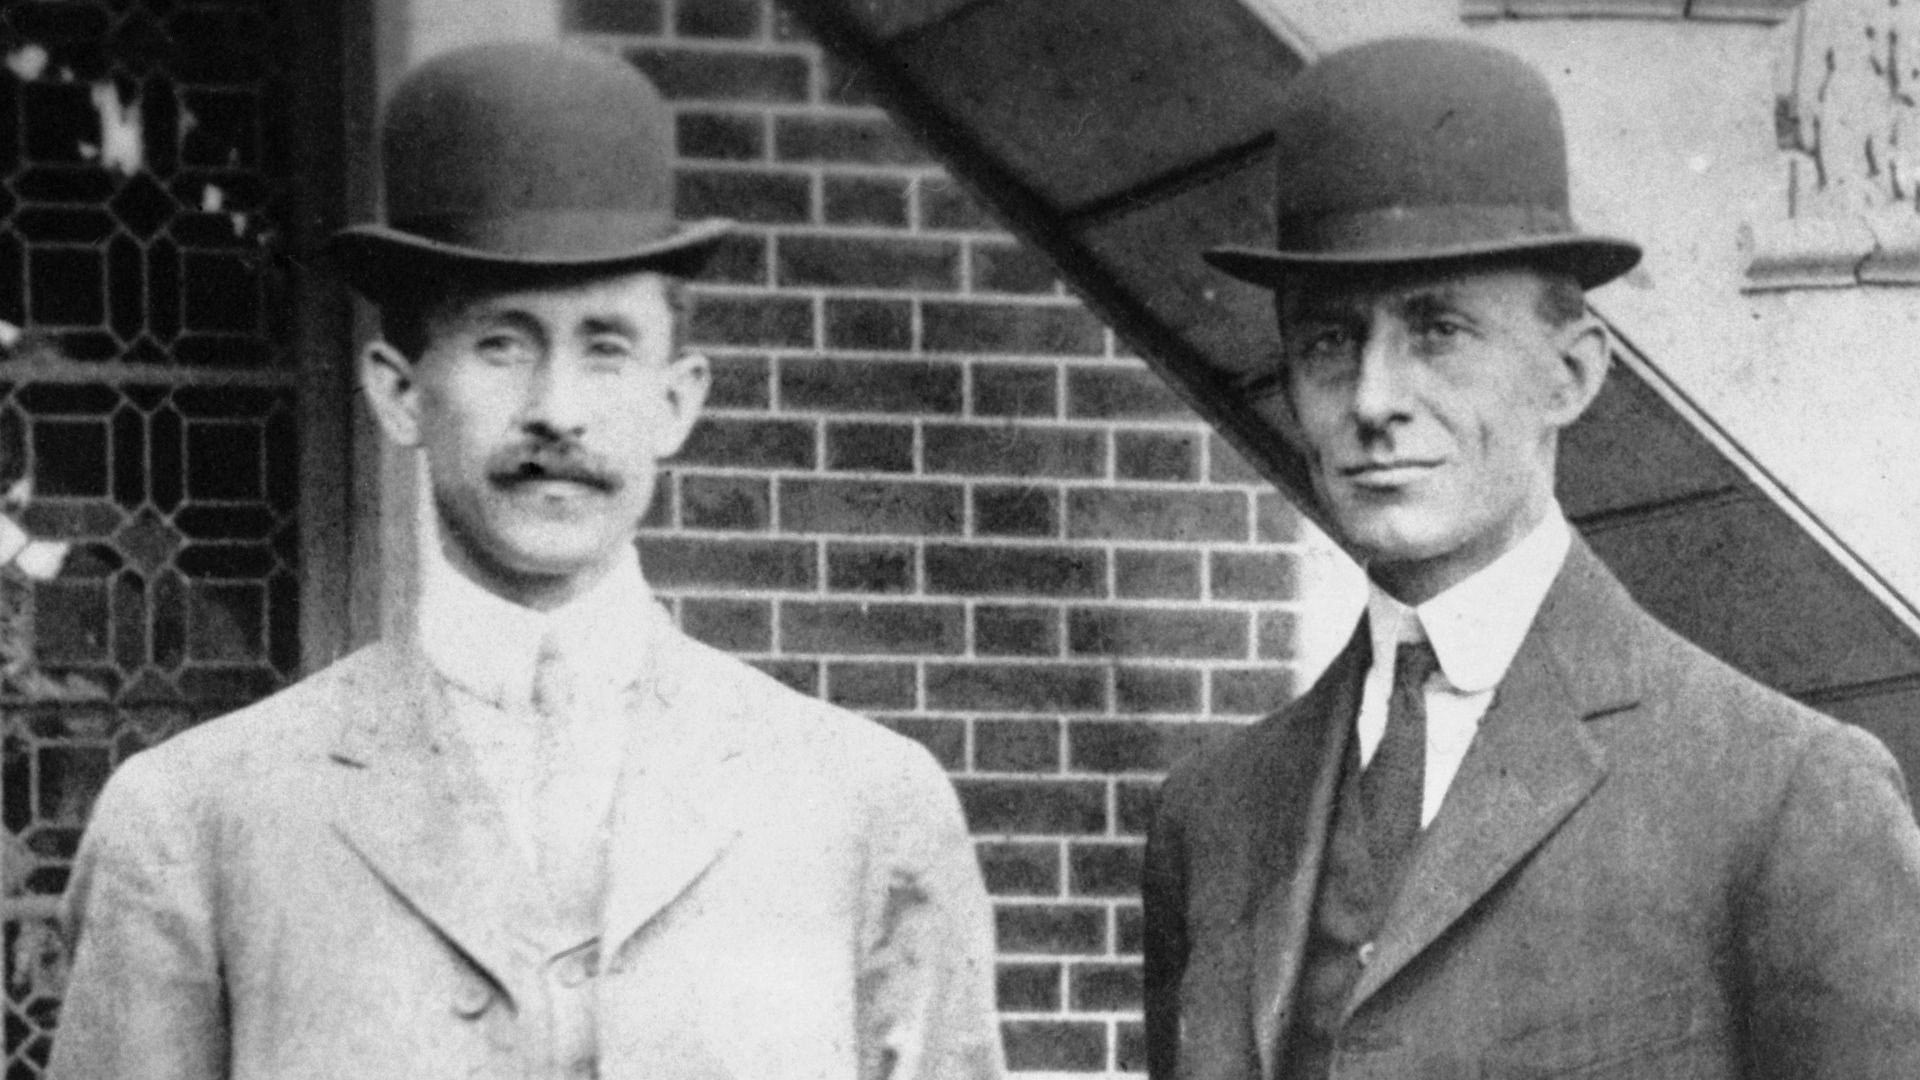 31 interesting facts about Wright Brothers (Orville and Wilbur Wright)